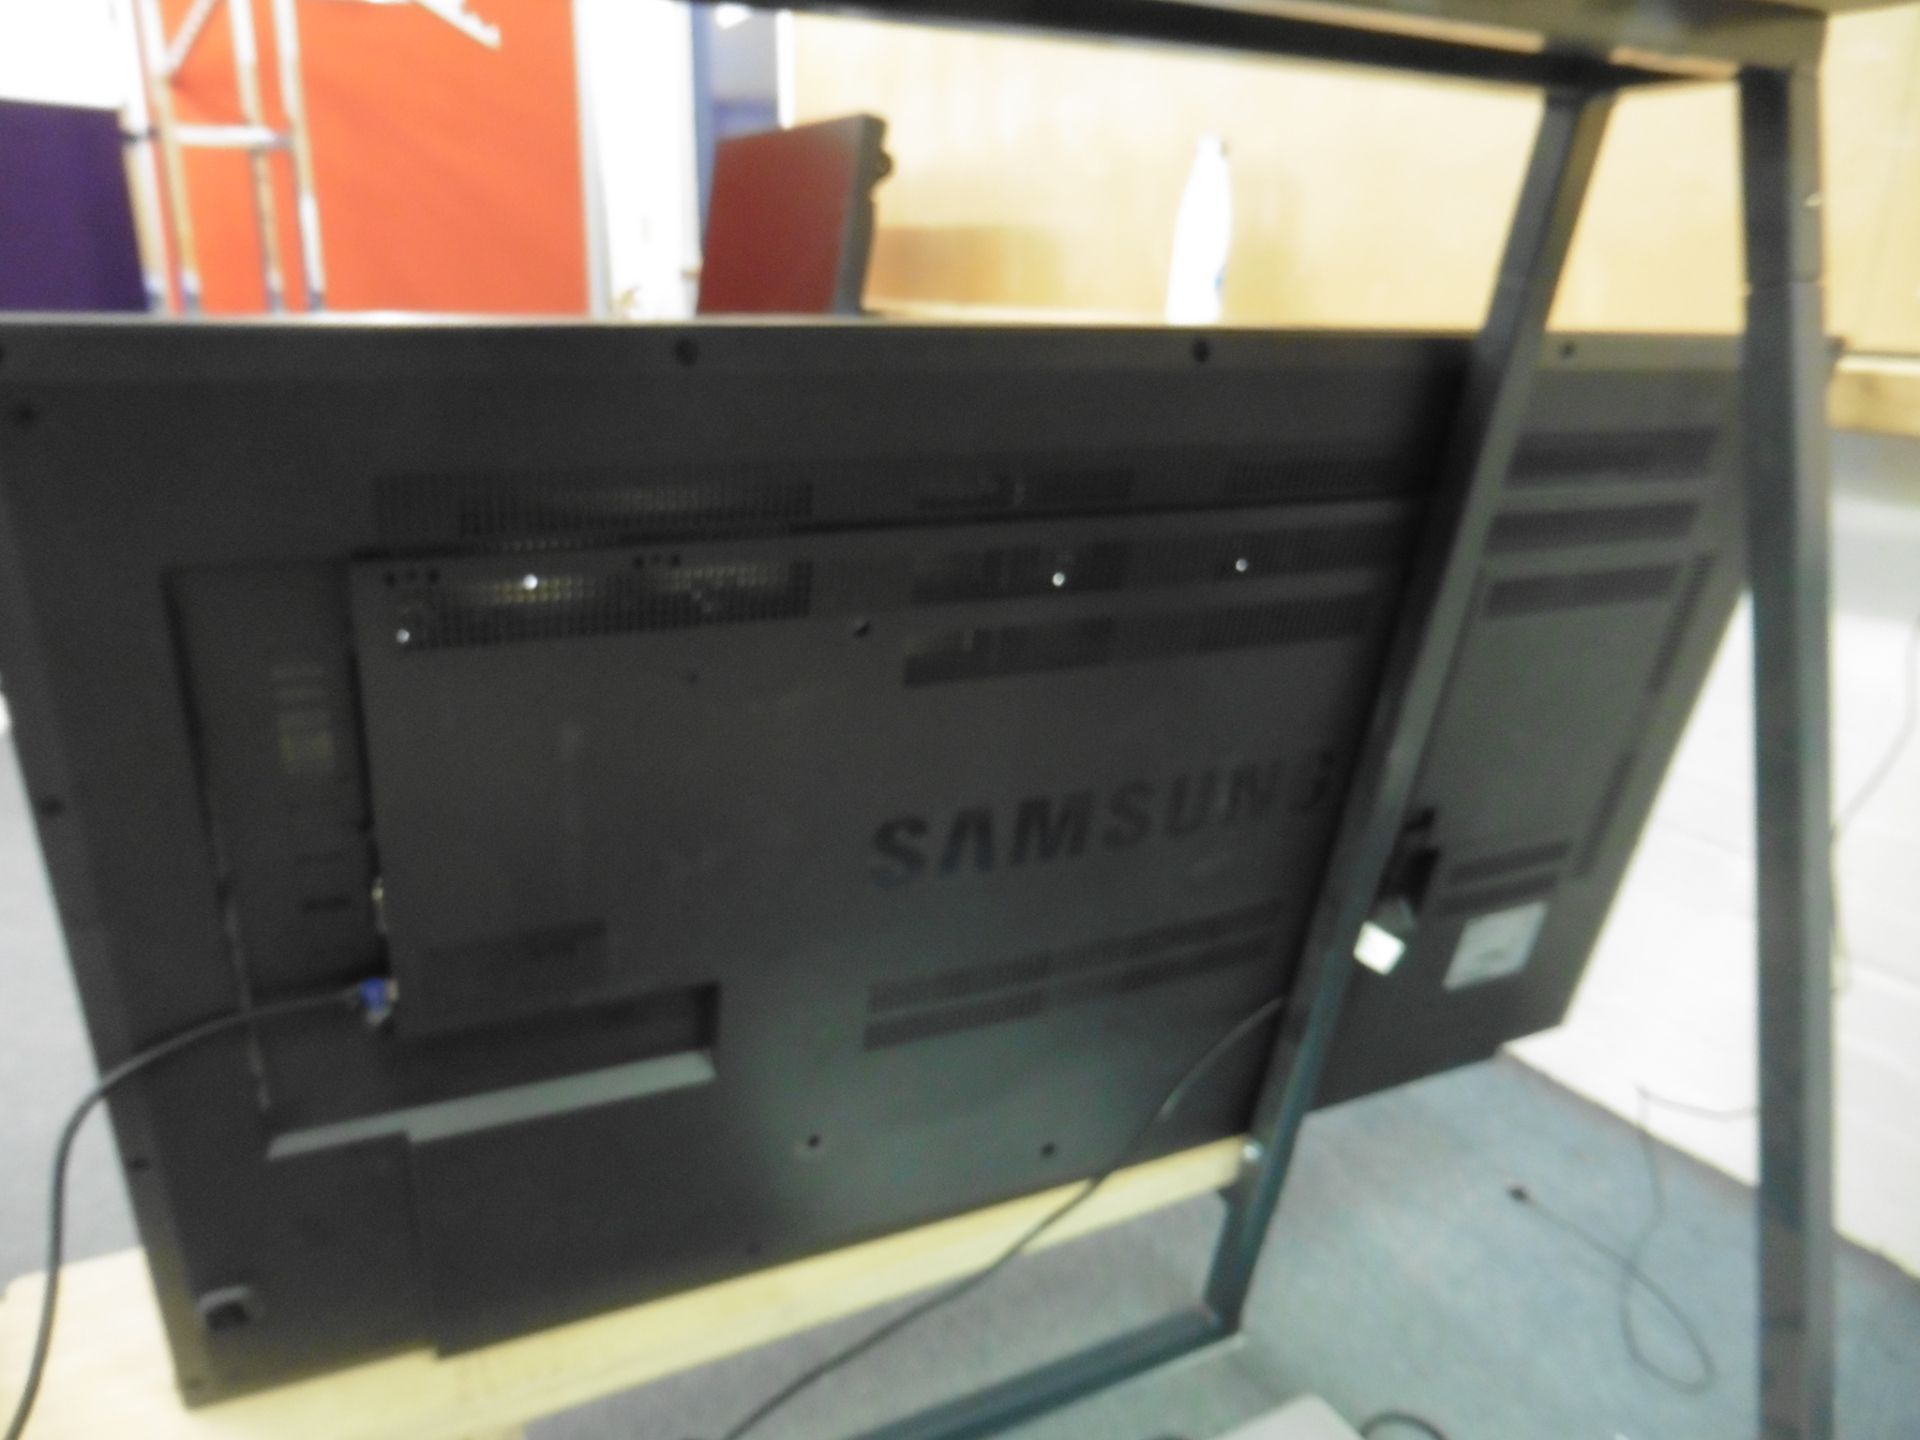 Samsung model UE55D colour display screen with remote (manufactured 2015) - Image 3 of 3